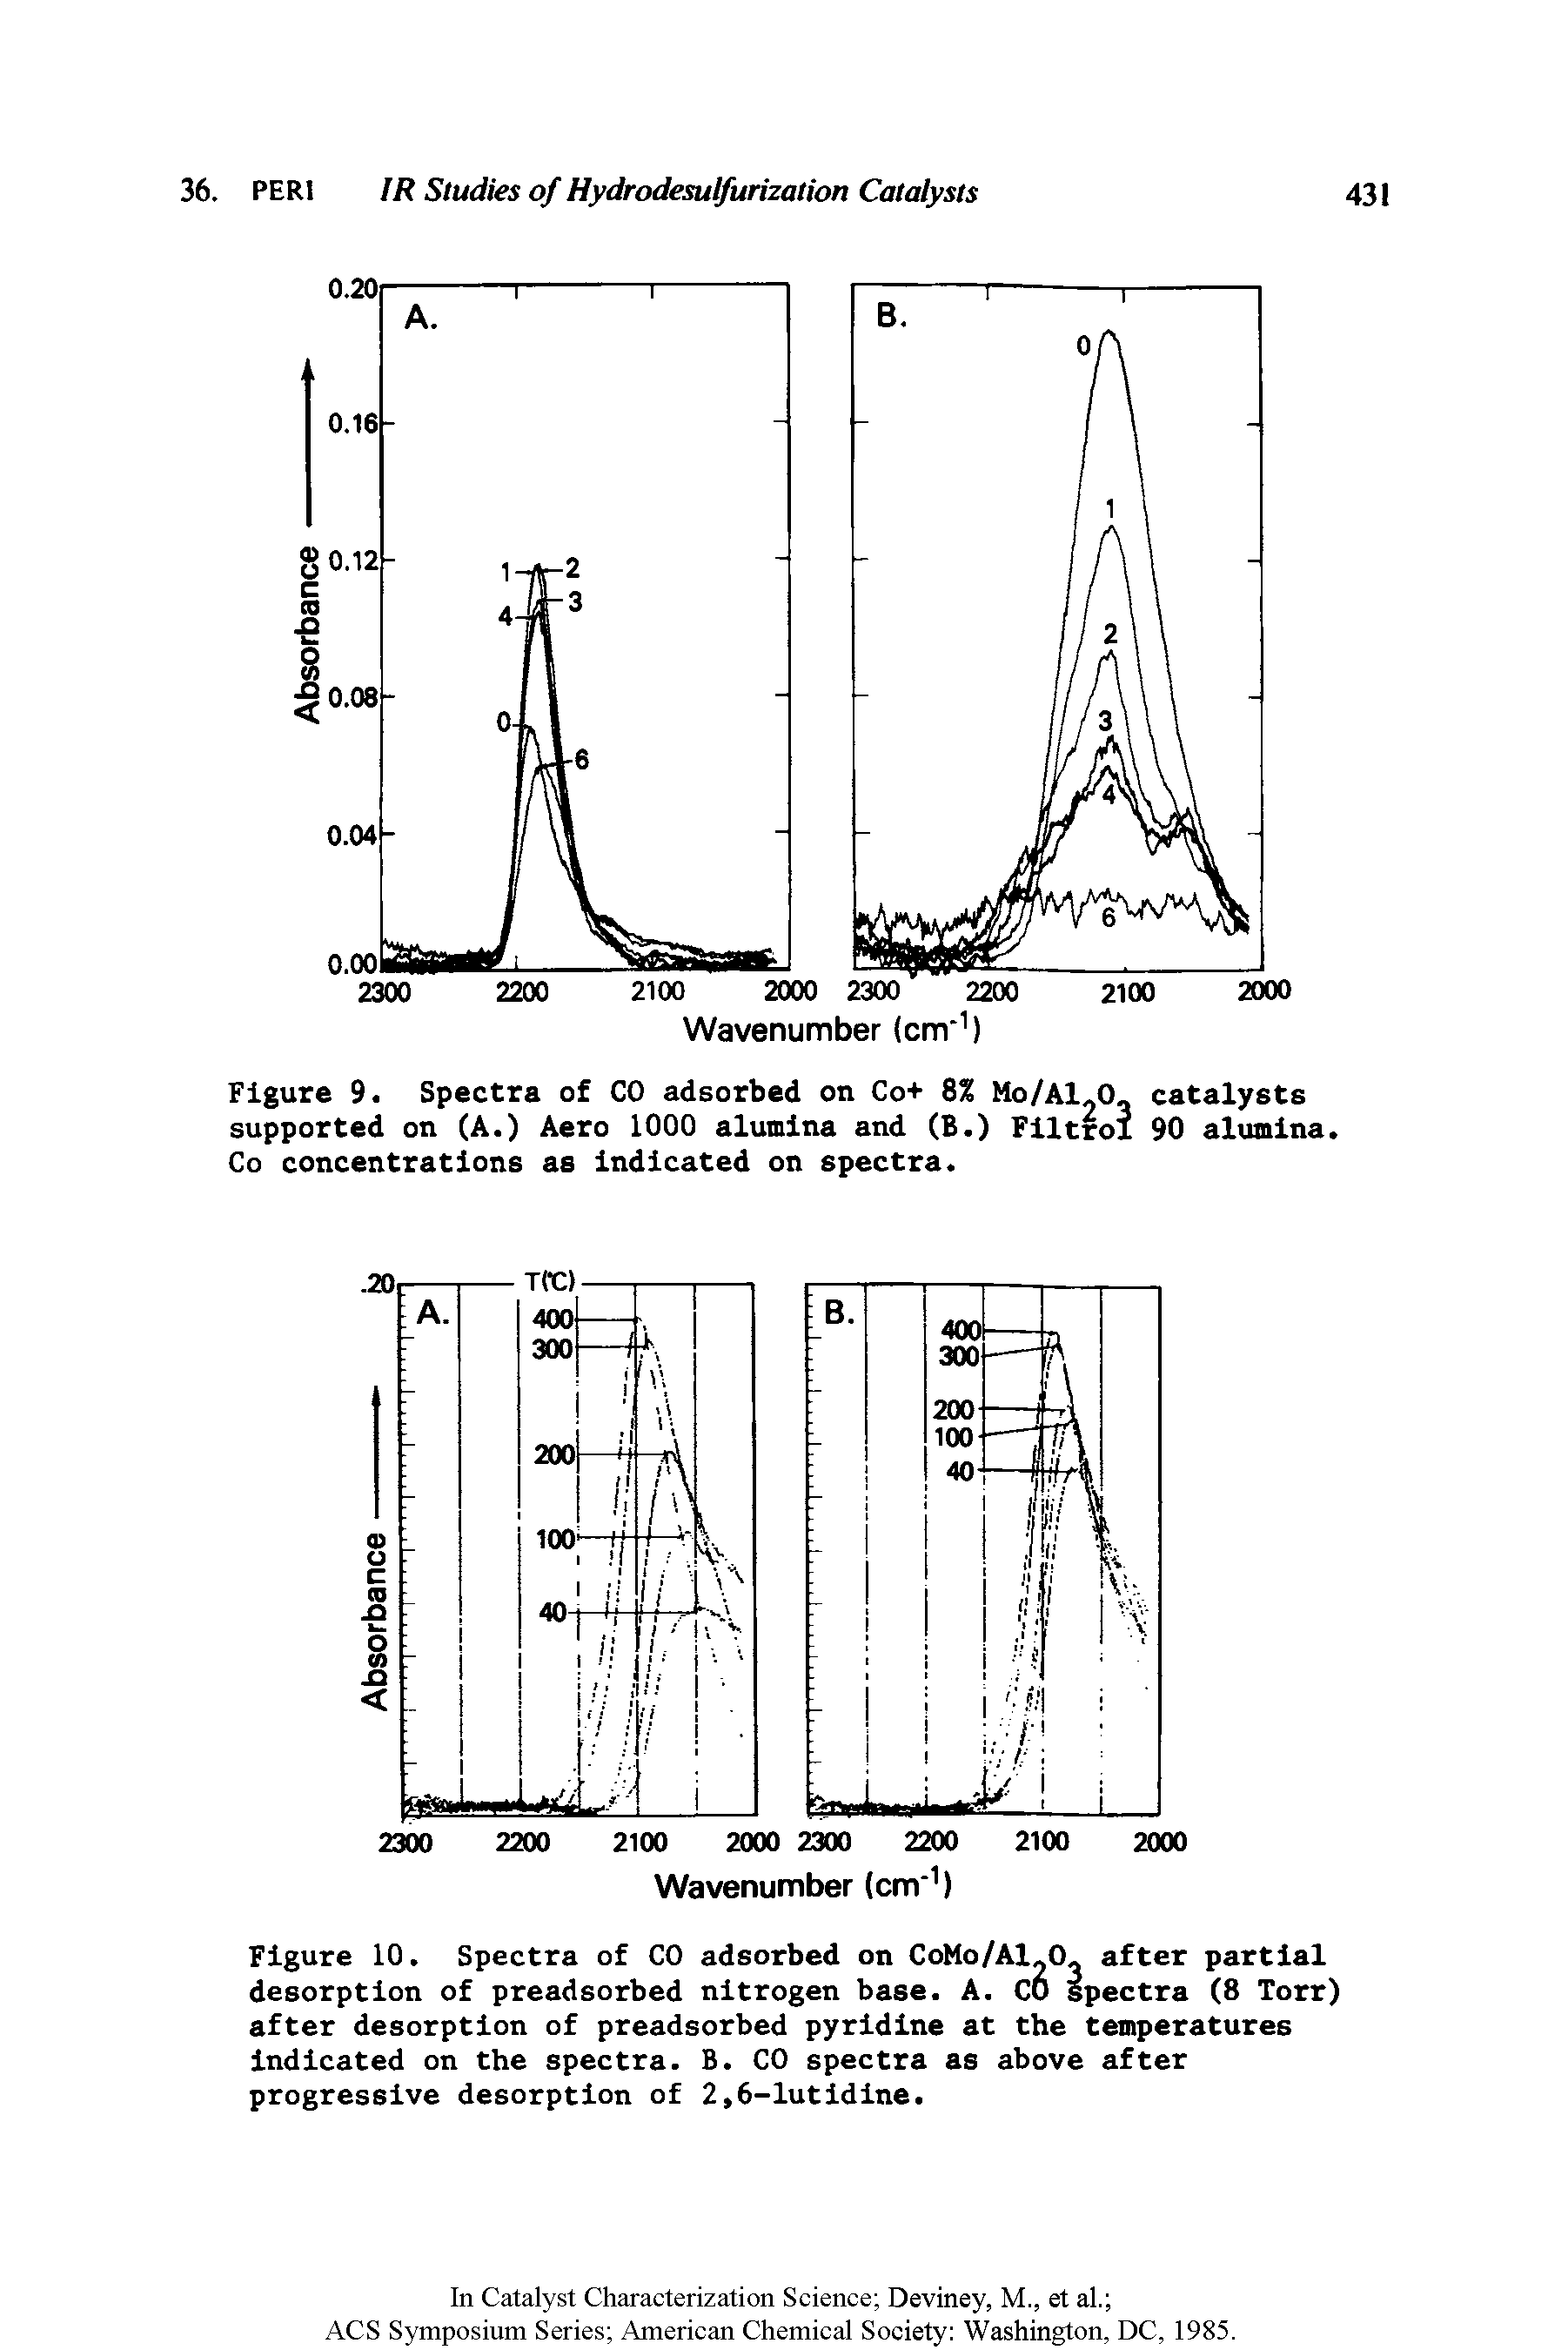 Figure 9. Spectra of CO adsorbed on Co+ 8% Mo/A1.0 catalysts supported on (A.) Aero 1000 alumina and (6.) Filtrol 90 alumina. Co concentrations as indicated on spectra.